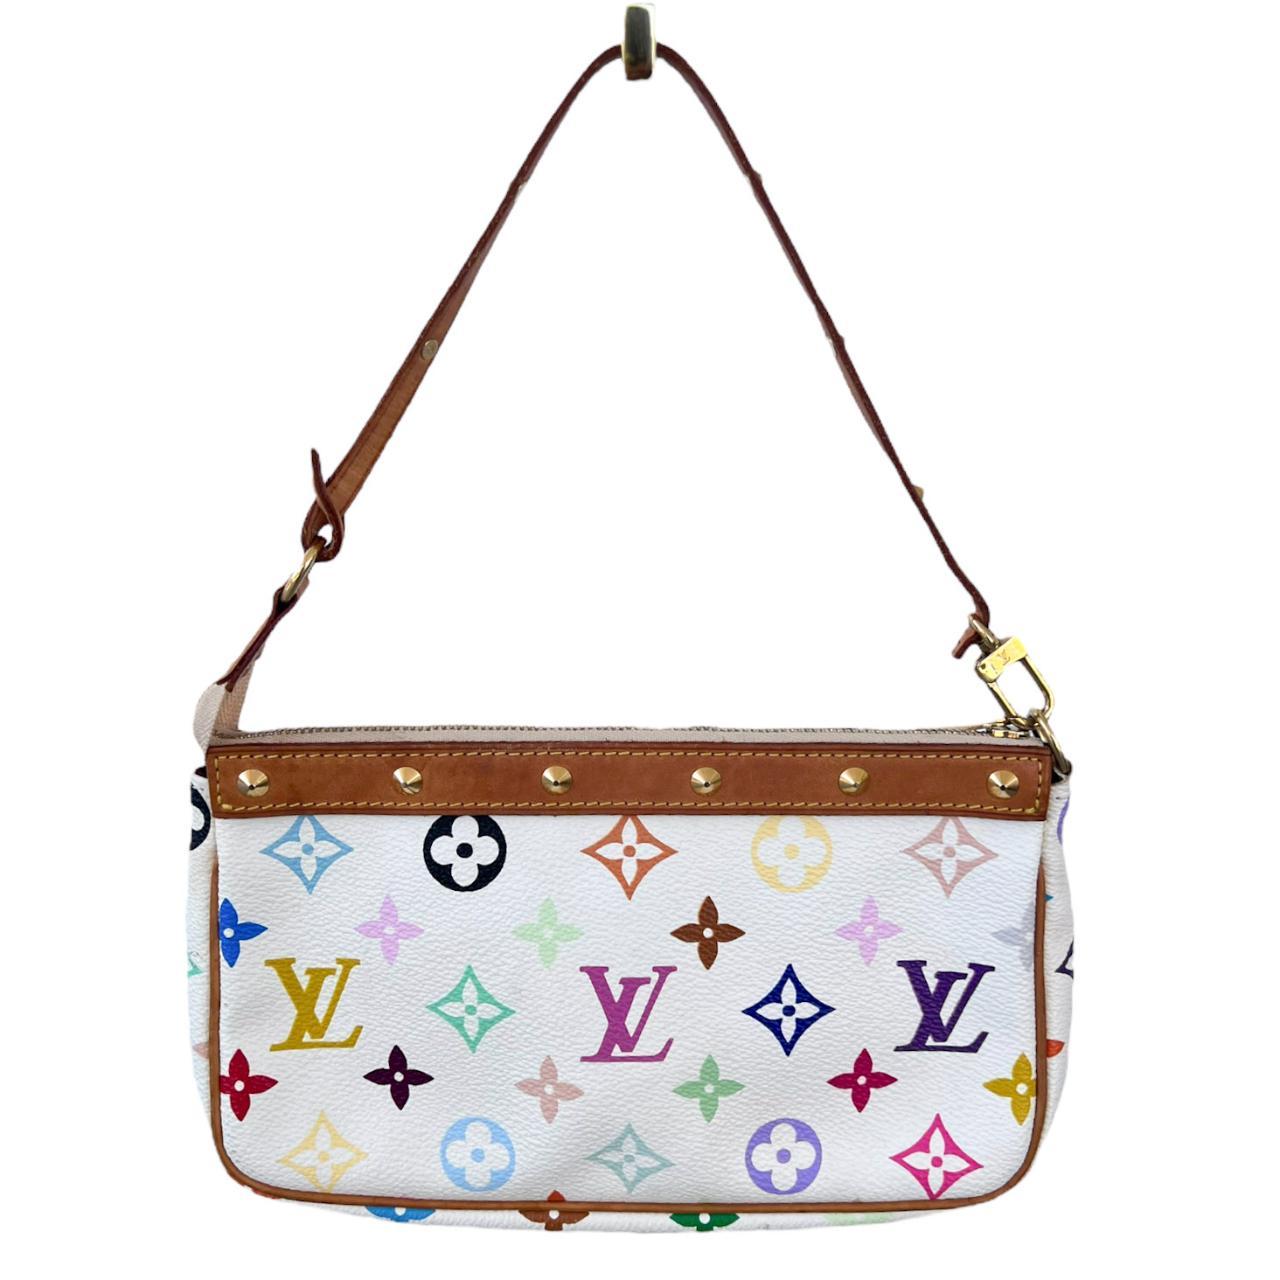 white and pink louis vuittons handbags